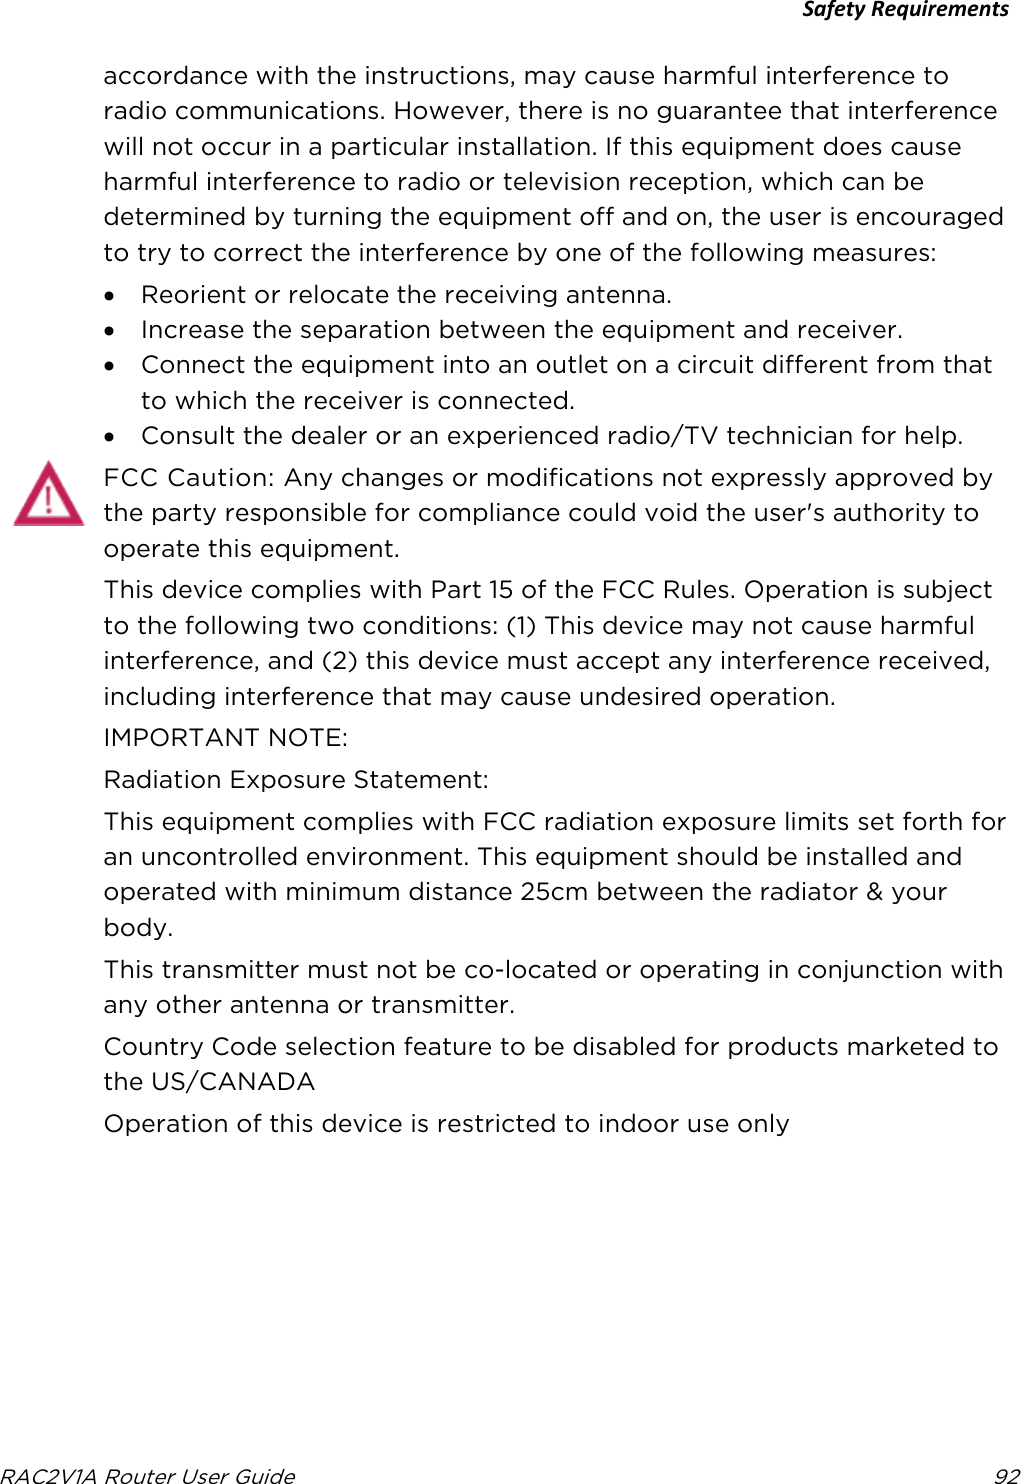 Safety Requirements  RAC2V1A Router User Guide 92  accordance with the instructions, may cause harmful interference to radio communications. However, there is no guarantee that interference will not occur in a particular installation. If this equipment does cause harmful interference to radio or television reception, which can be determined by turning the equipment off and on, the user is encouraged to try to correct the interference by one of the following measures: • Reorient or relocate the receiving antenna. • Increase the separation between the equipment and receiver. • Connect the equipment into an outlet on a circuit different from that to which the receiver is connected. • Consult the dealer or an experienced radio/TV technician for help. FCC Caution: Any changes or modifications not expressly approved by the party responsible for compliance could void the user&apos;s authority to operate this equipment. This device complies with Part 15 of the FCC Rules. Operation is subject to the following two conditions: (1) This device may not cause harmful interference, and (2) this device must accept any interference received, including interference that may cause undesired operation. IMPORTANT NOTE: Radiation Exposure Statement: This equipment complies with FCC radiation exposure limits set forth for an uncontrolled environment. This equipment should be installed and operated with minimum distance 25cm between the radiator &amp; your body. This transmitter must not be co-located or operating in conjunction with any other antenna or transmitter. Country Code selection feature to be disabled for products marketed to the US/CANADA Operation of this device is restricted to indoor use only